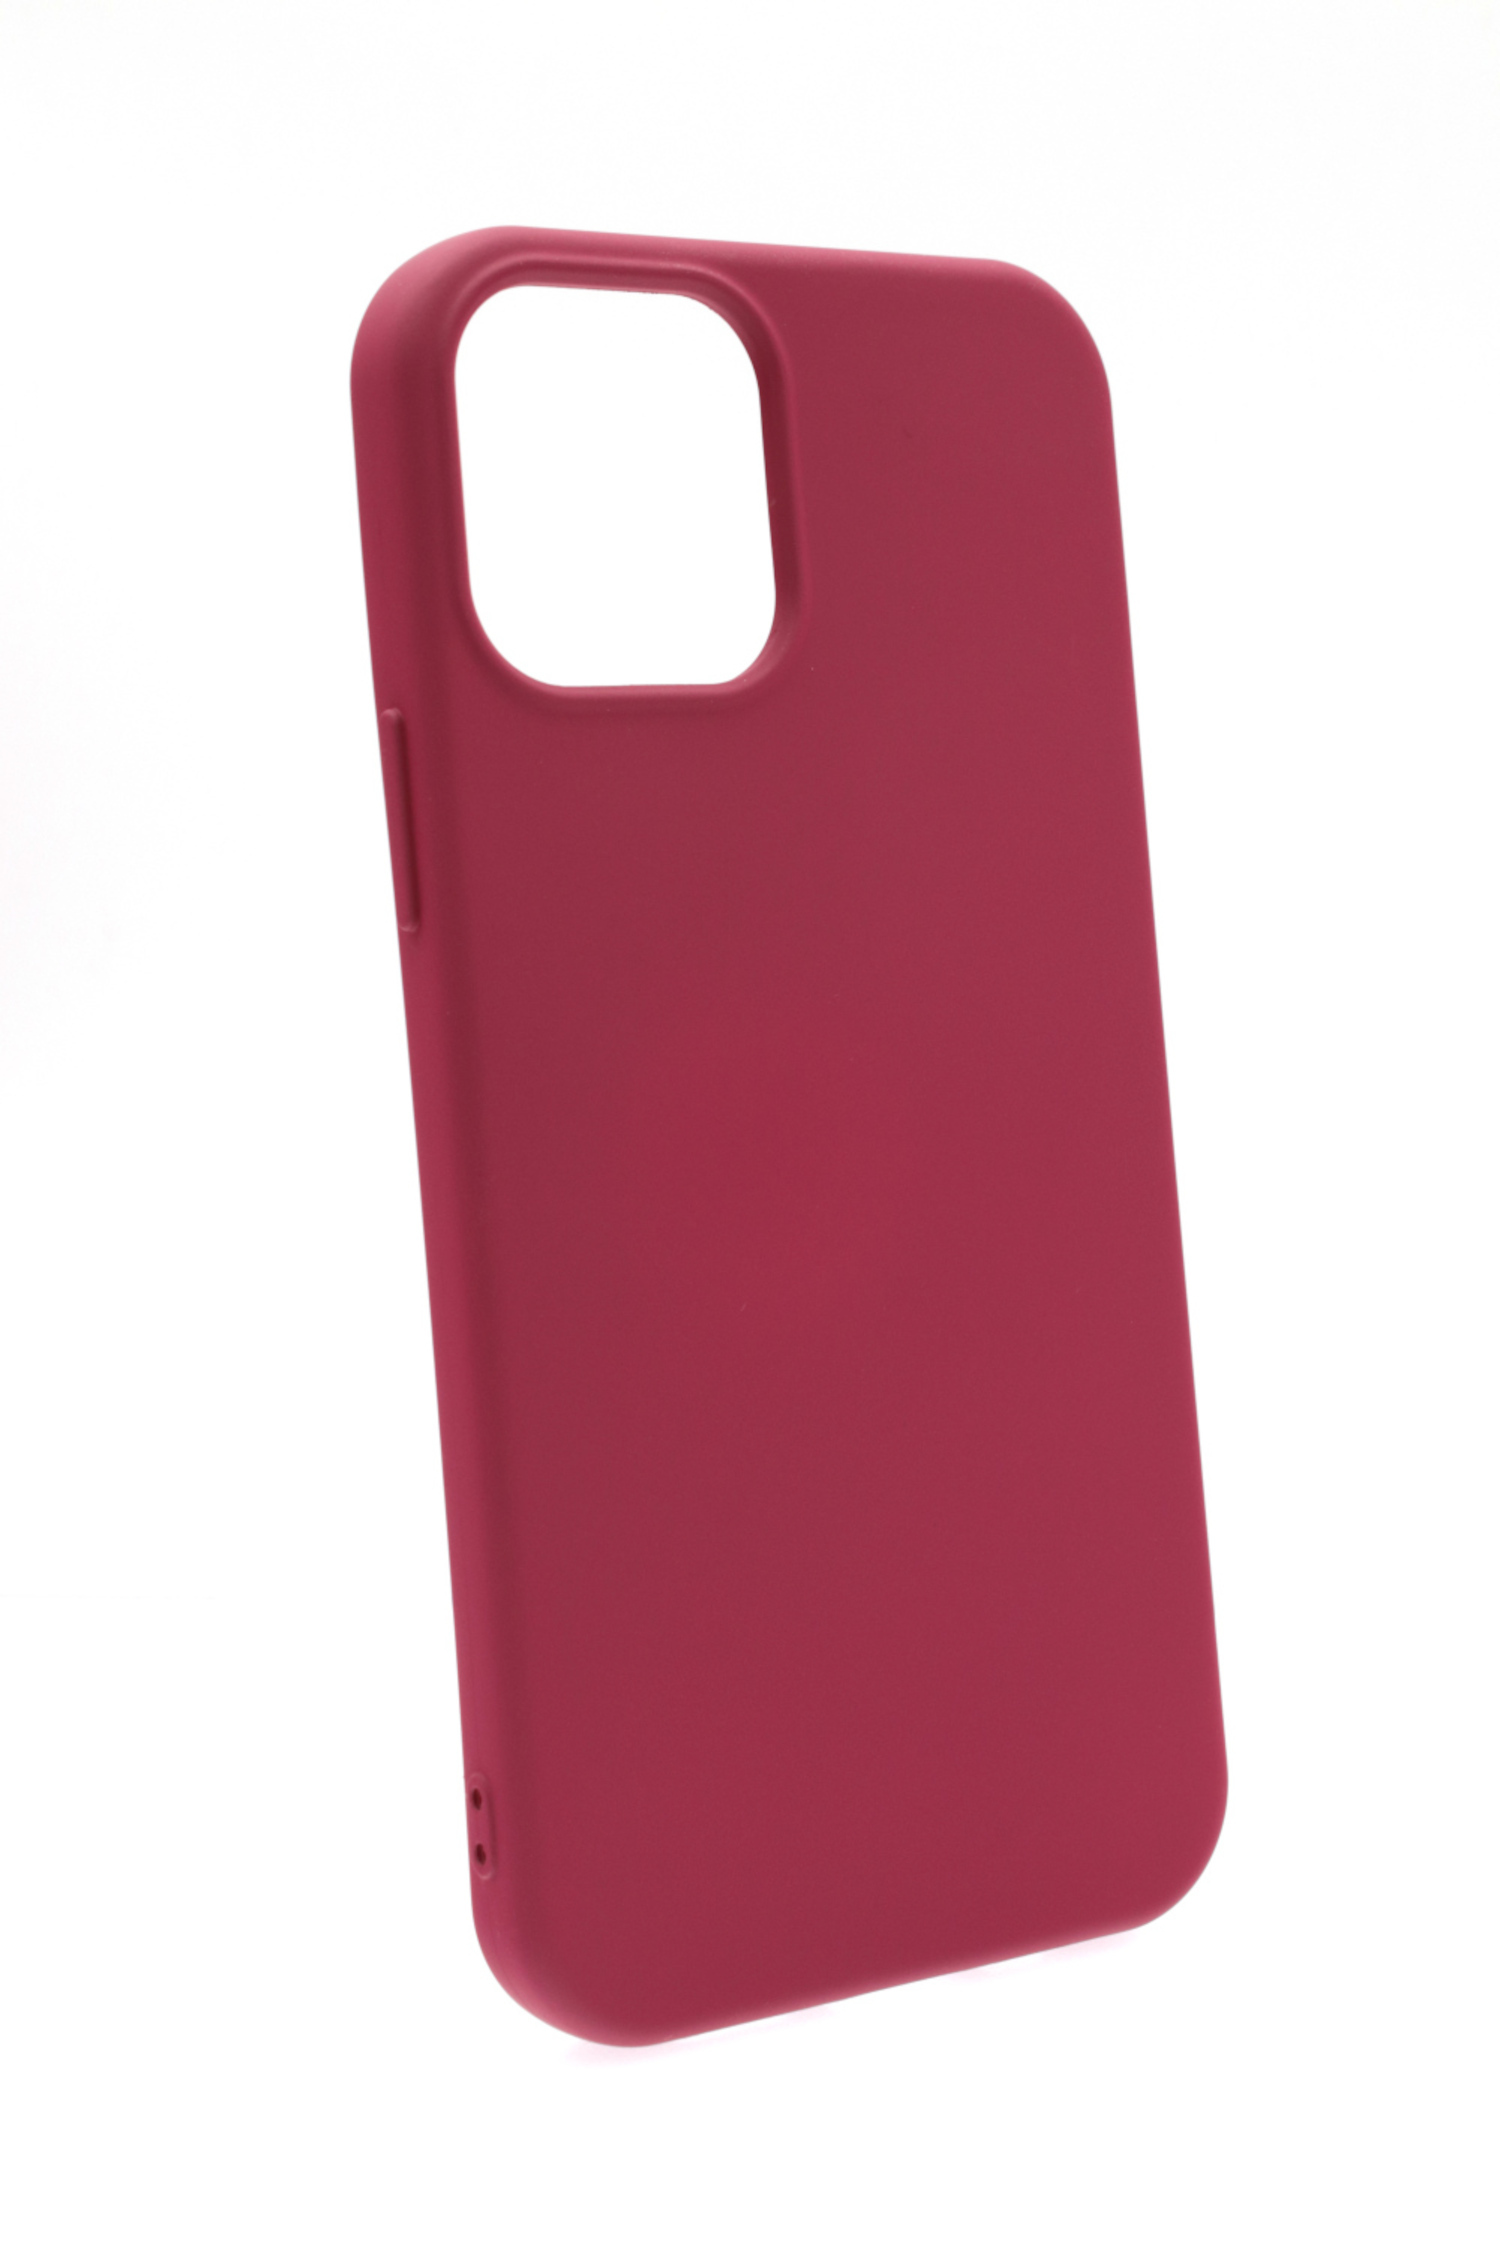 12, Apple, 12 Case, iPhone Pro, Maroon Silikon iPhone Backcover, JAMCOVER